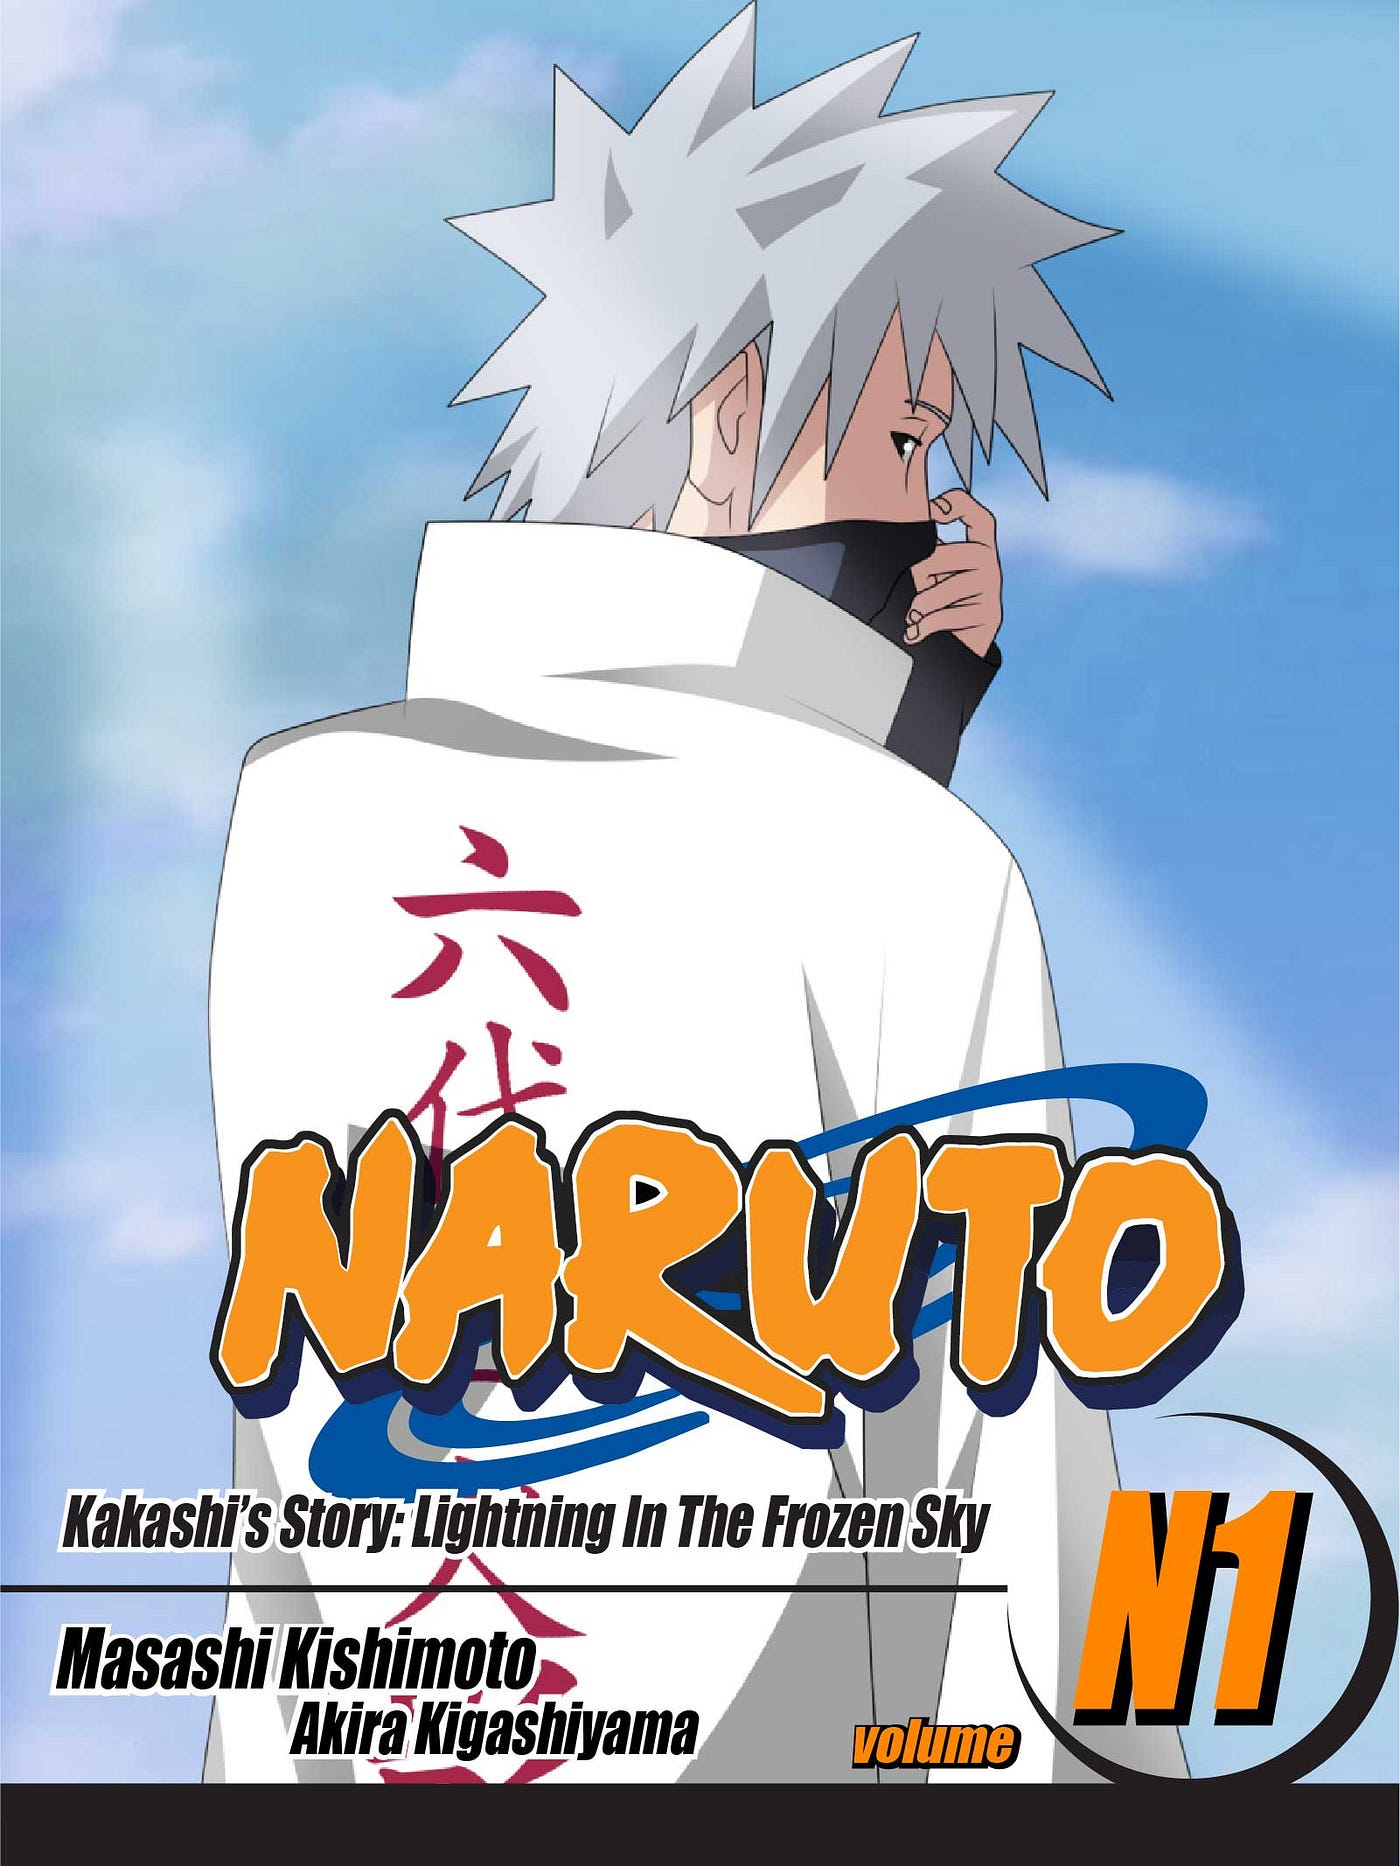 Kakashi To Get His Own Story In Naruto This Year